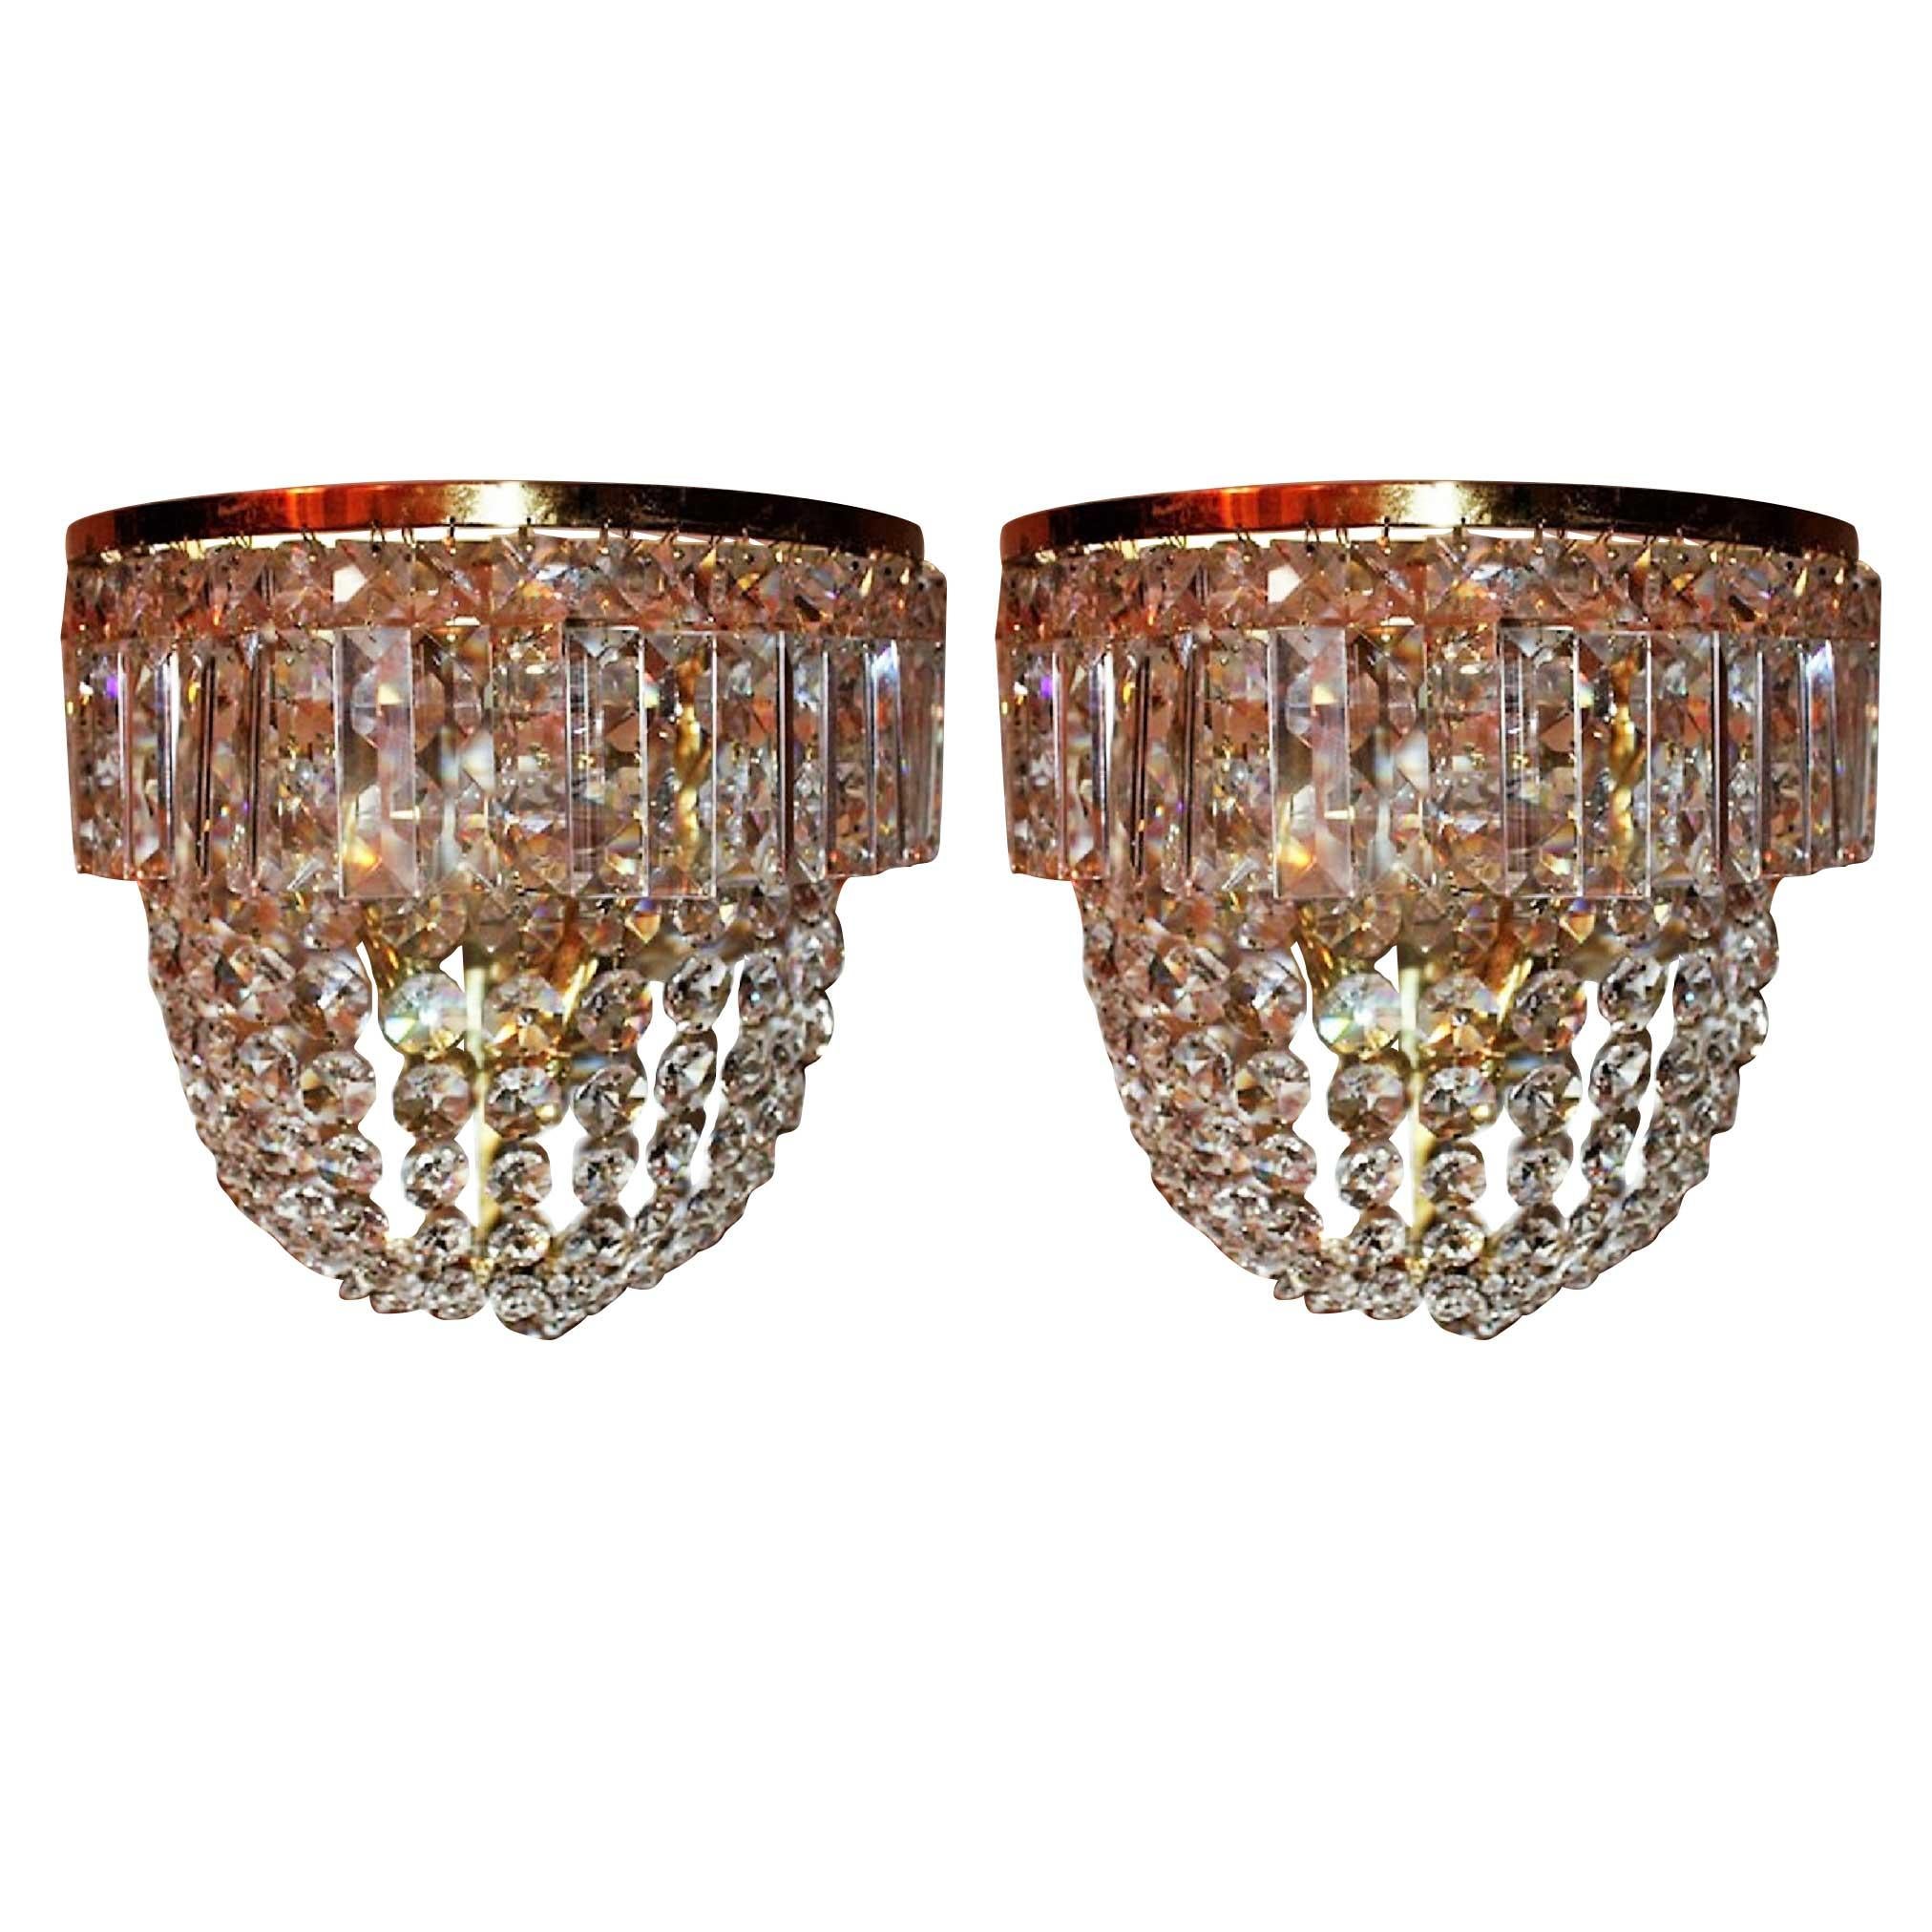 Pair of Grand Wall Sconces by Ch. Palme, Germany, 1960s, Cut Crystal and Brass